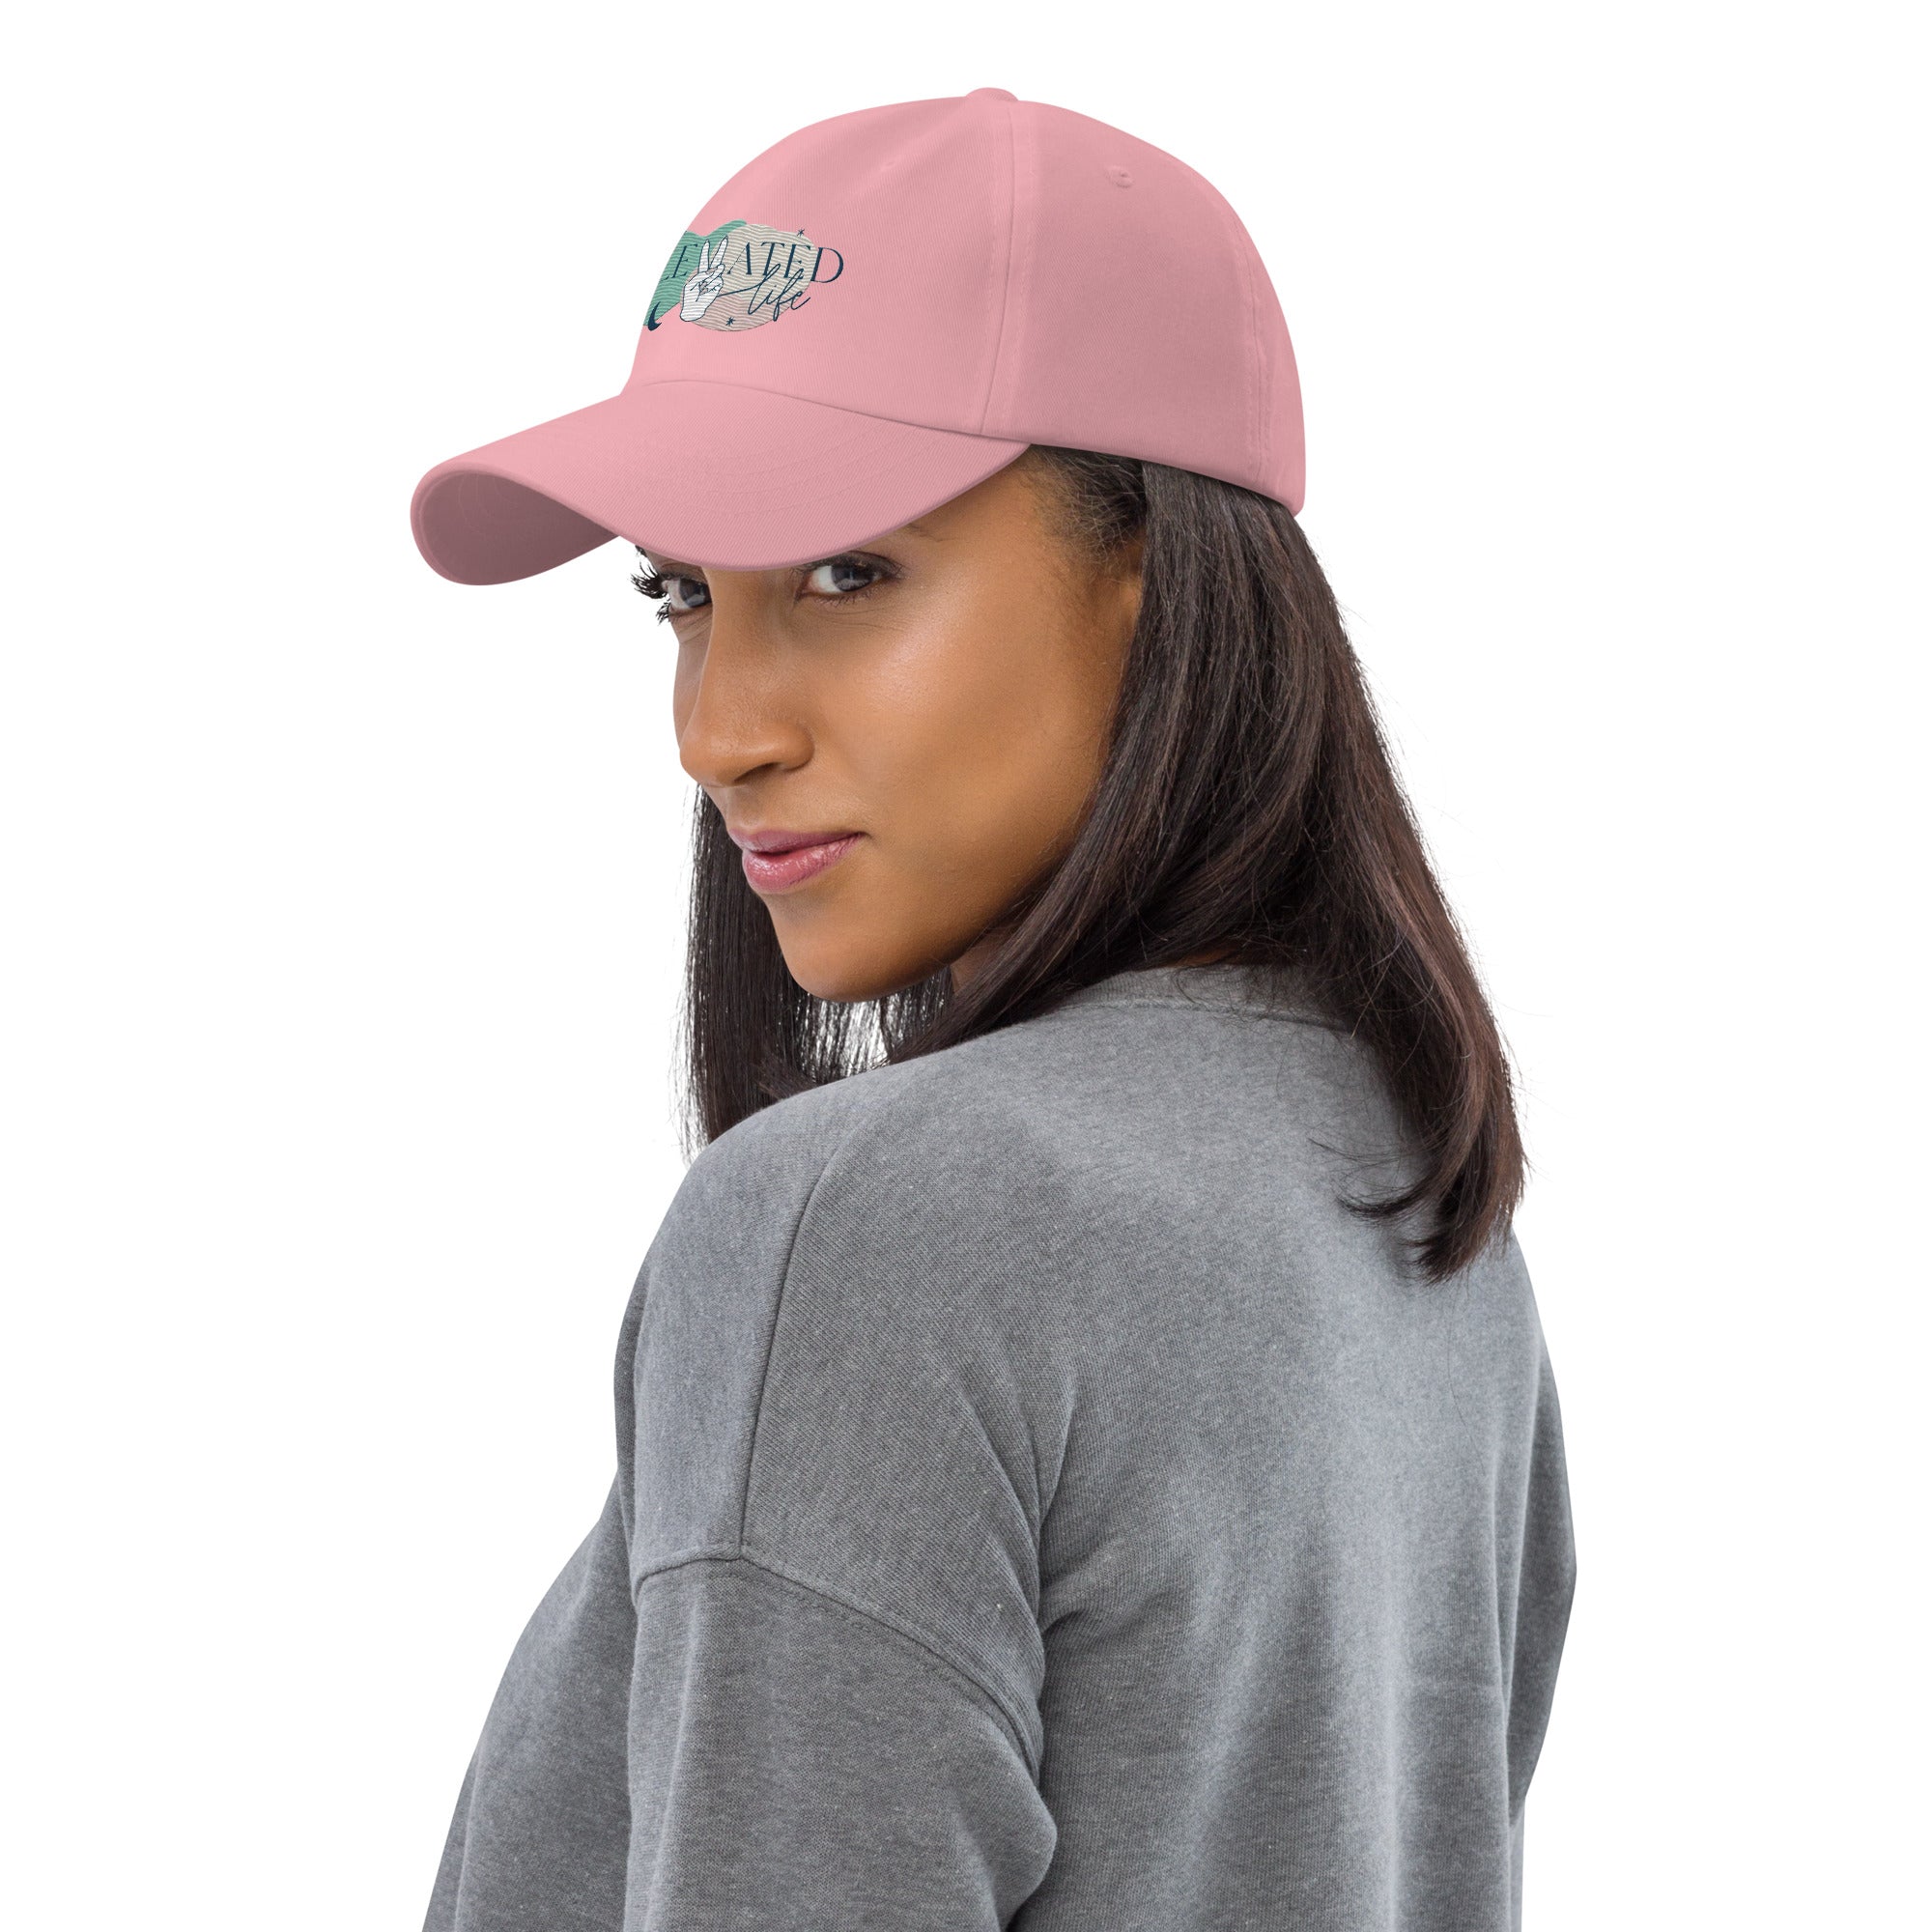 The Elevated Life Dad Hat